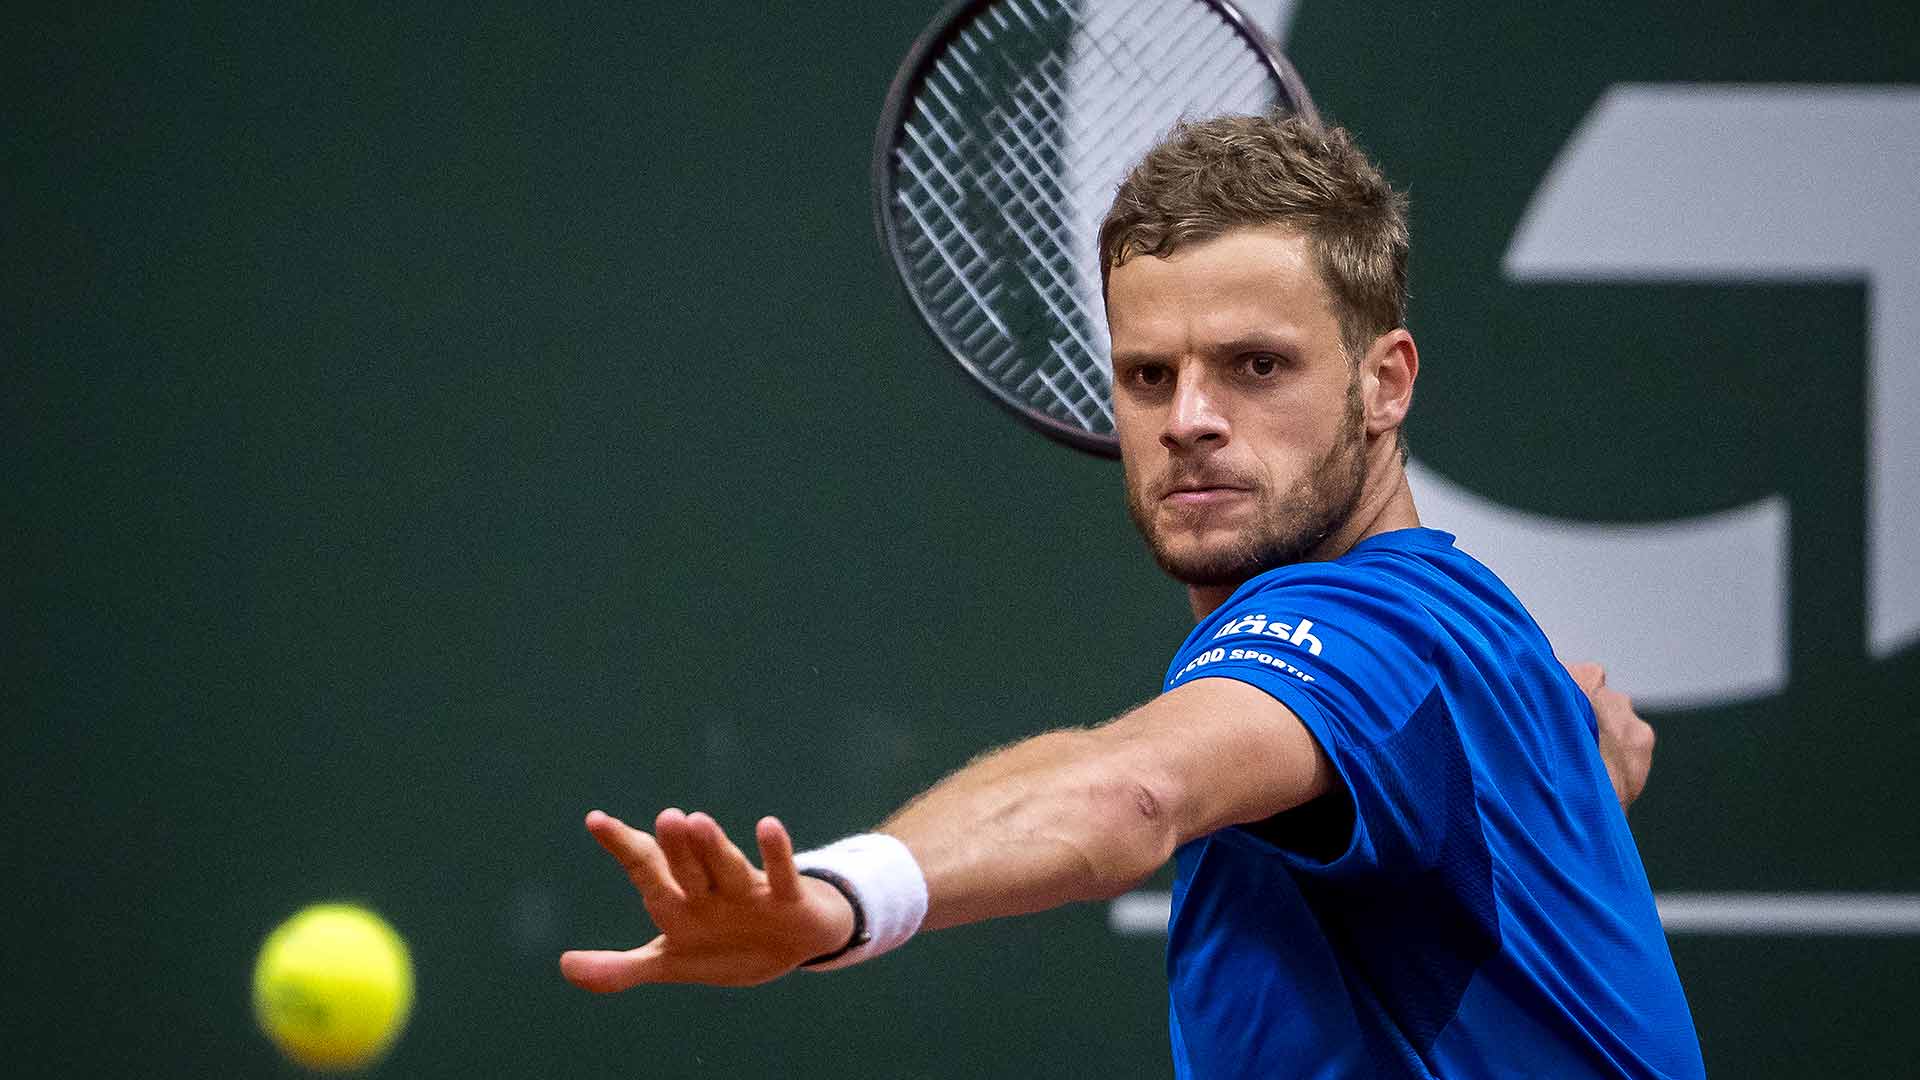 Yannick Hanfmann was within two games of victory against Andy Murray before rain suspended play for the night in Geneva.